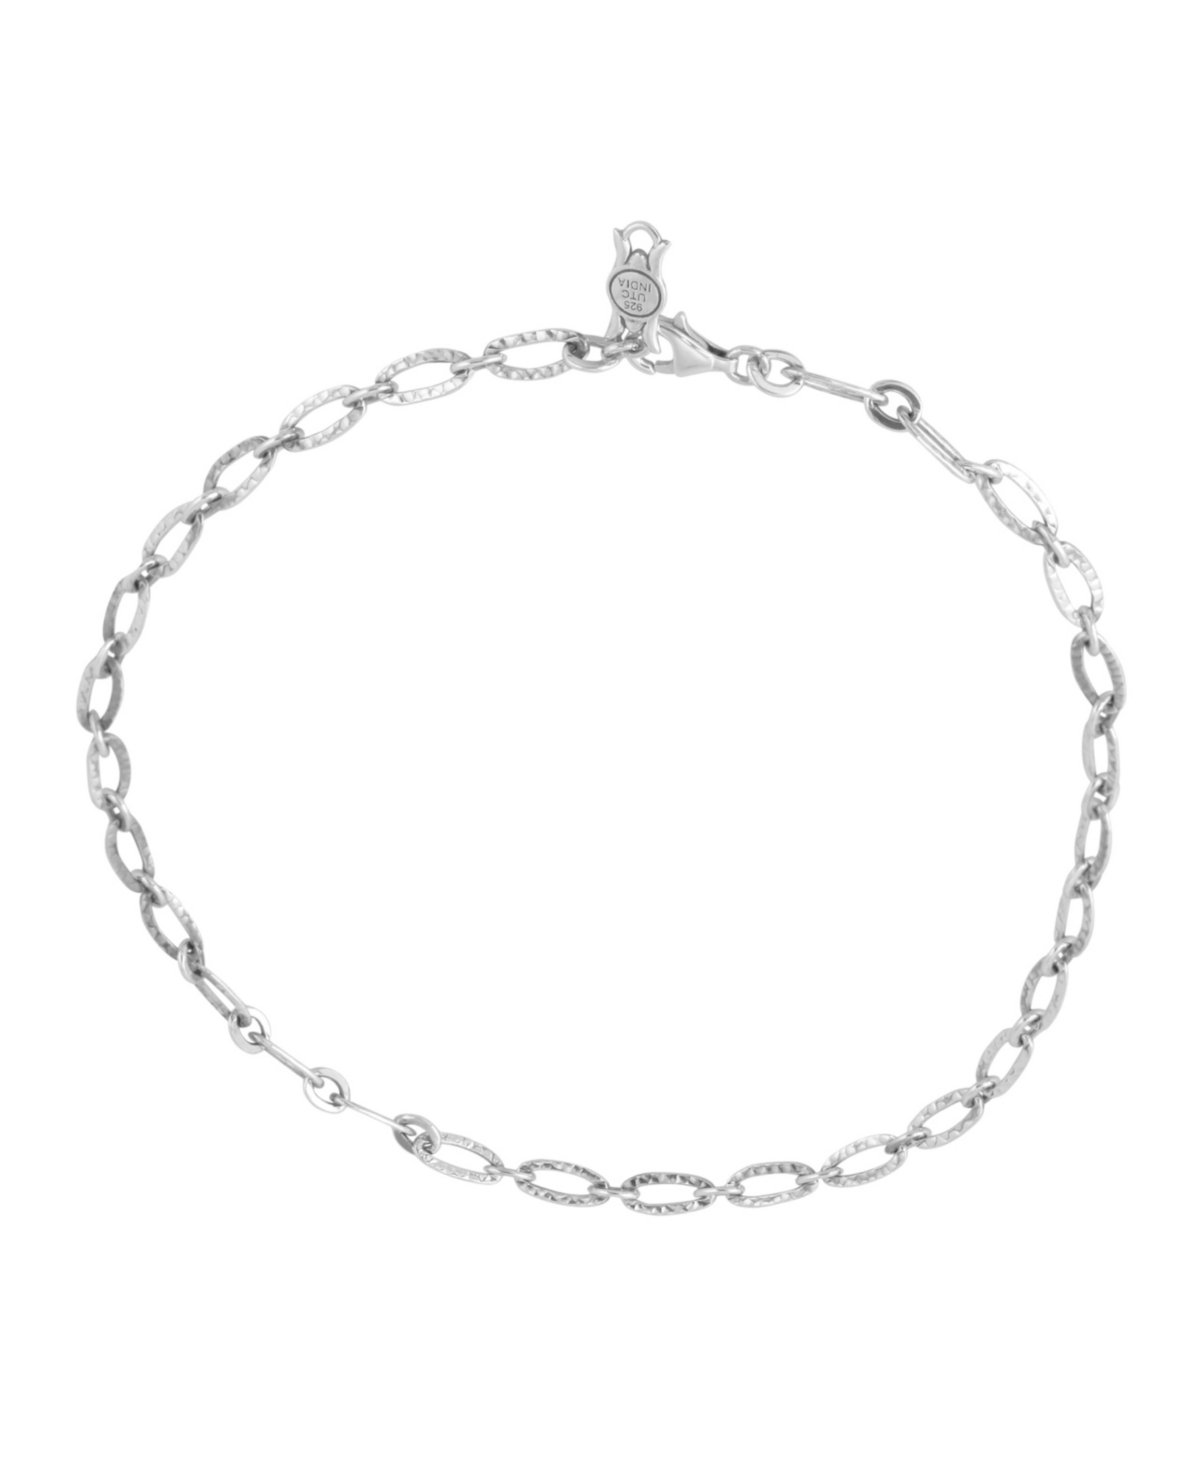 Sterling Silver Polished Oval Link Chain Necklace-17 or 20 Inches - Sterling silver